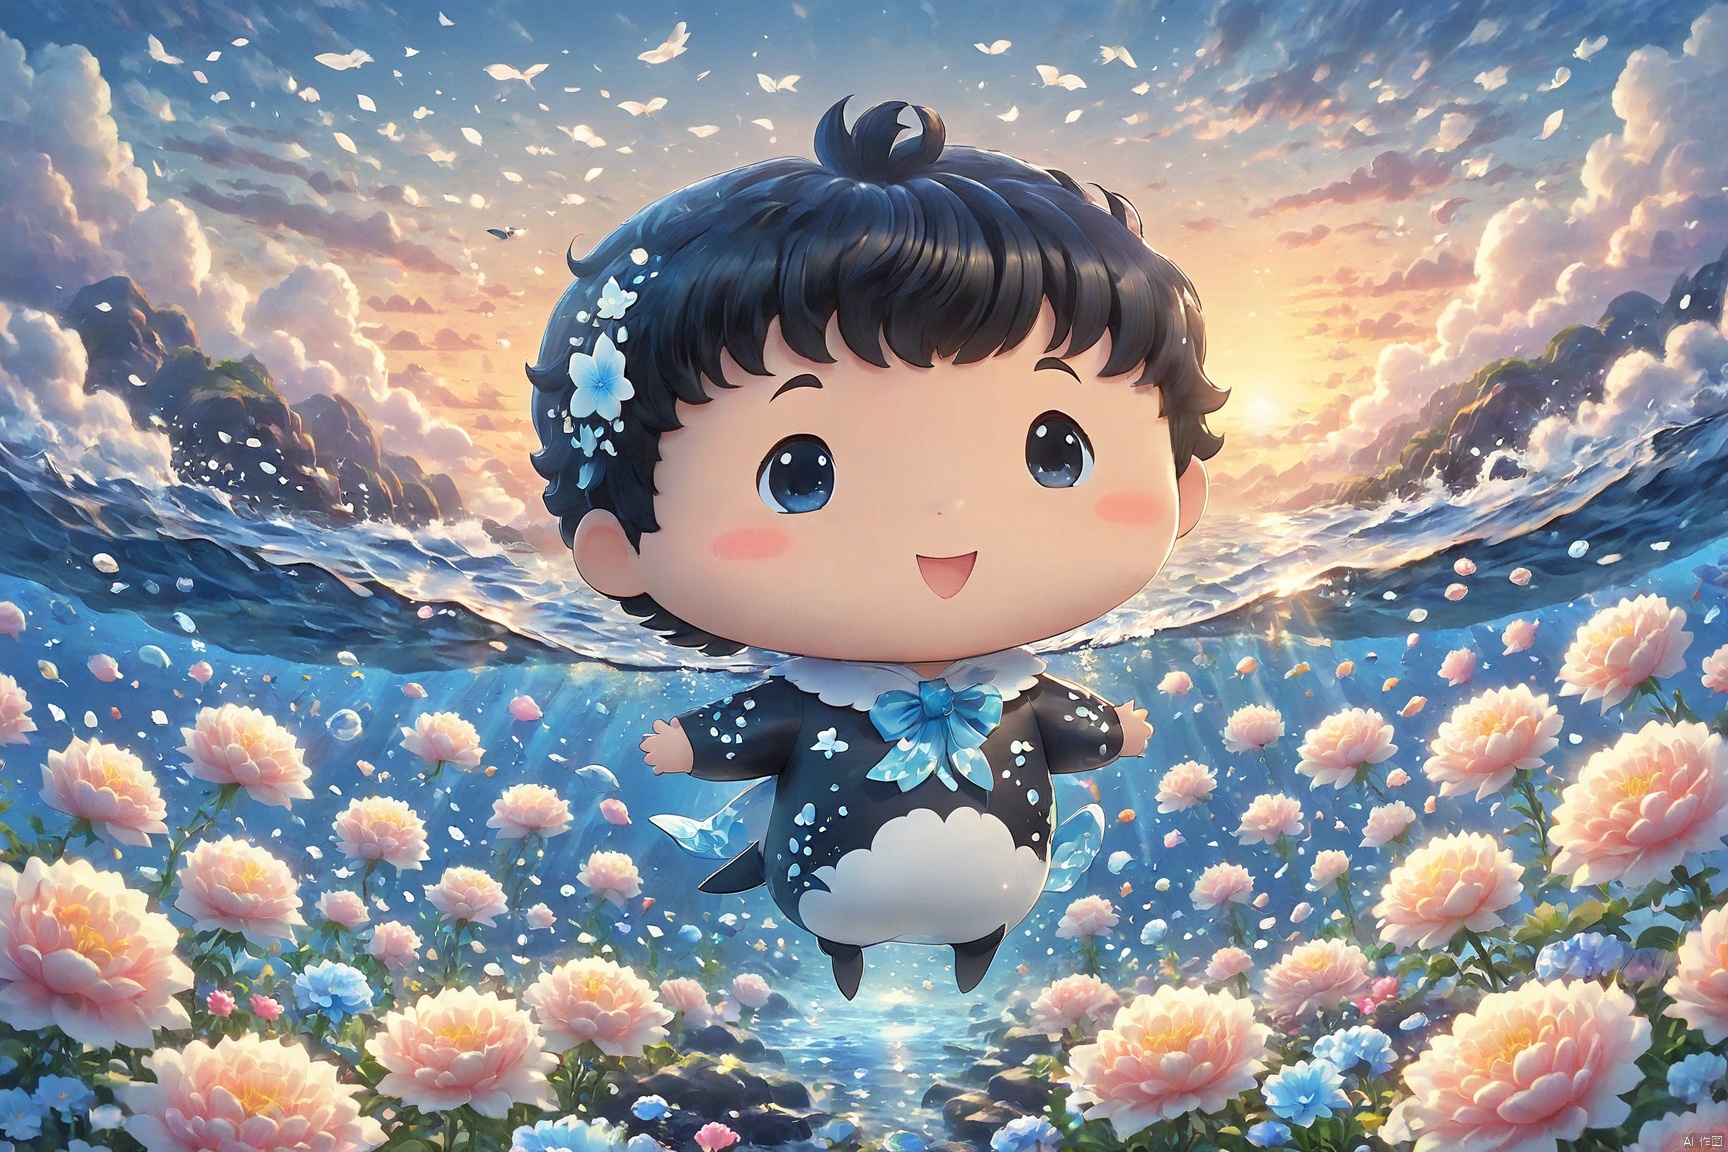  A boy with shining eyes, swimming through a colorful underwater world. Surrounded by various adorable sea creatures, a killer whale after him,A masterpiece with bright lights and cartoon-like visual effects., duobaansheying, MiRU